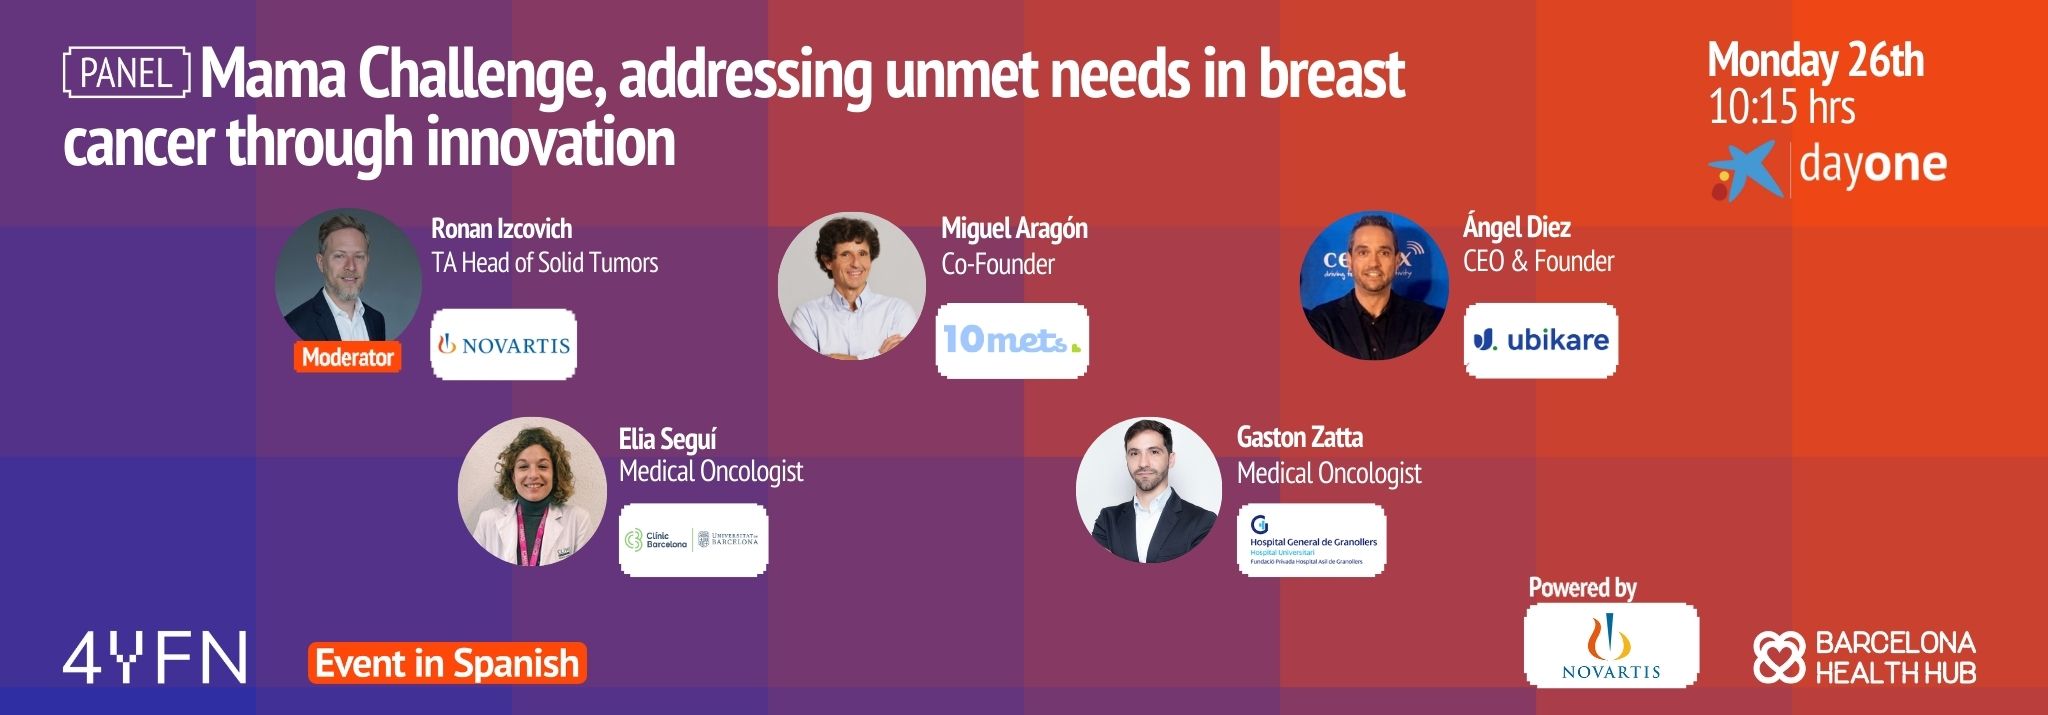 4YFN - Panel: Mama Challenge, addressing unmet needs in breast cancer through innovation